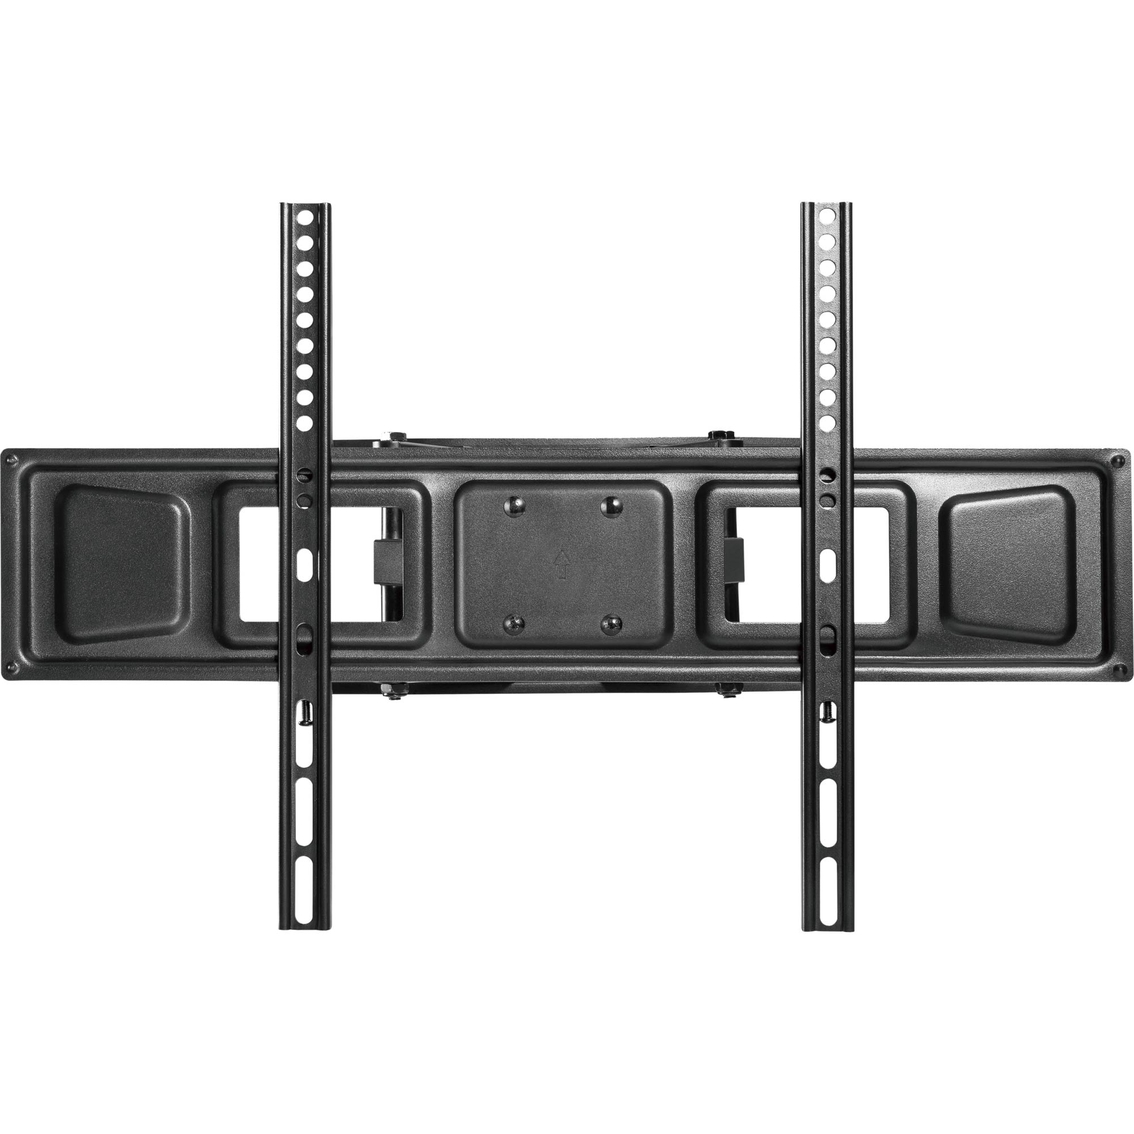 Promounts Articulating Wall Mount For 37 - 80 in. Screens Holds Up To 88 lb. - Image 2 of 9